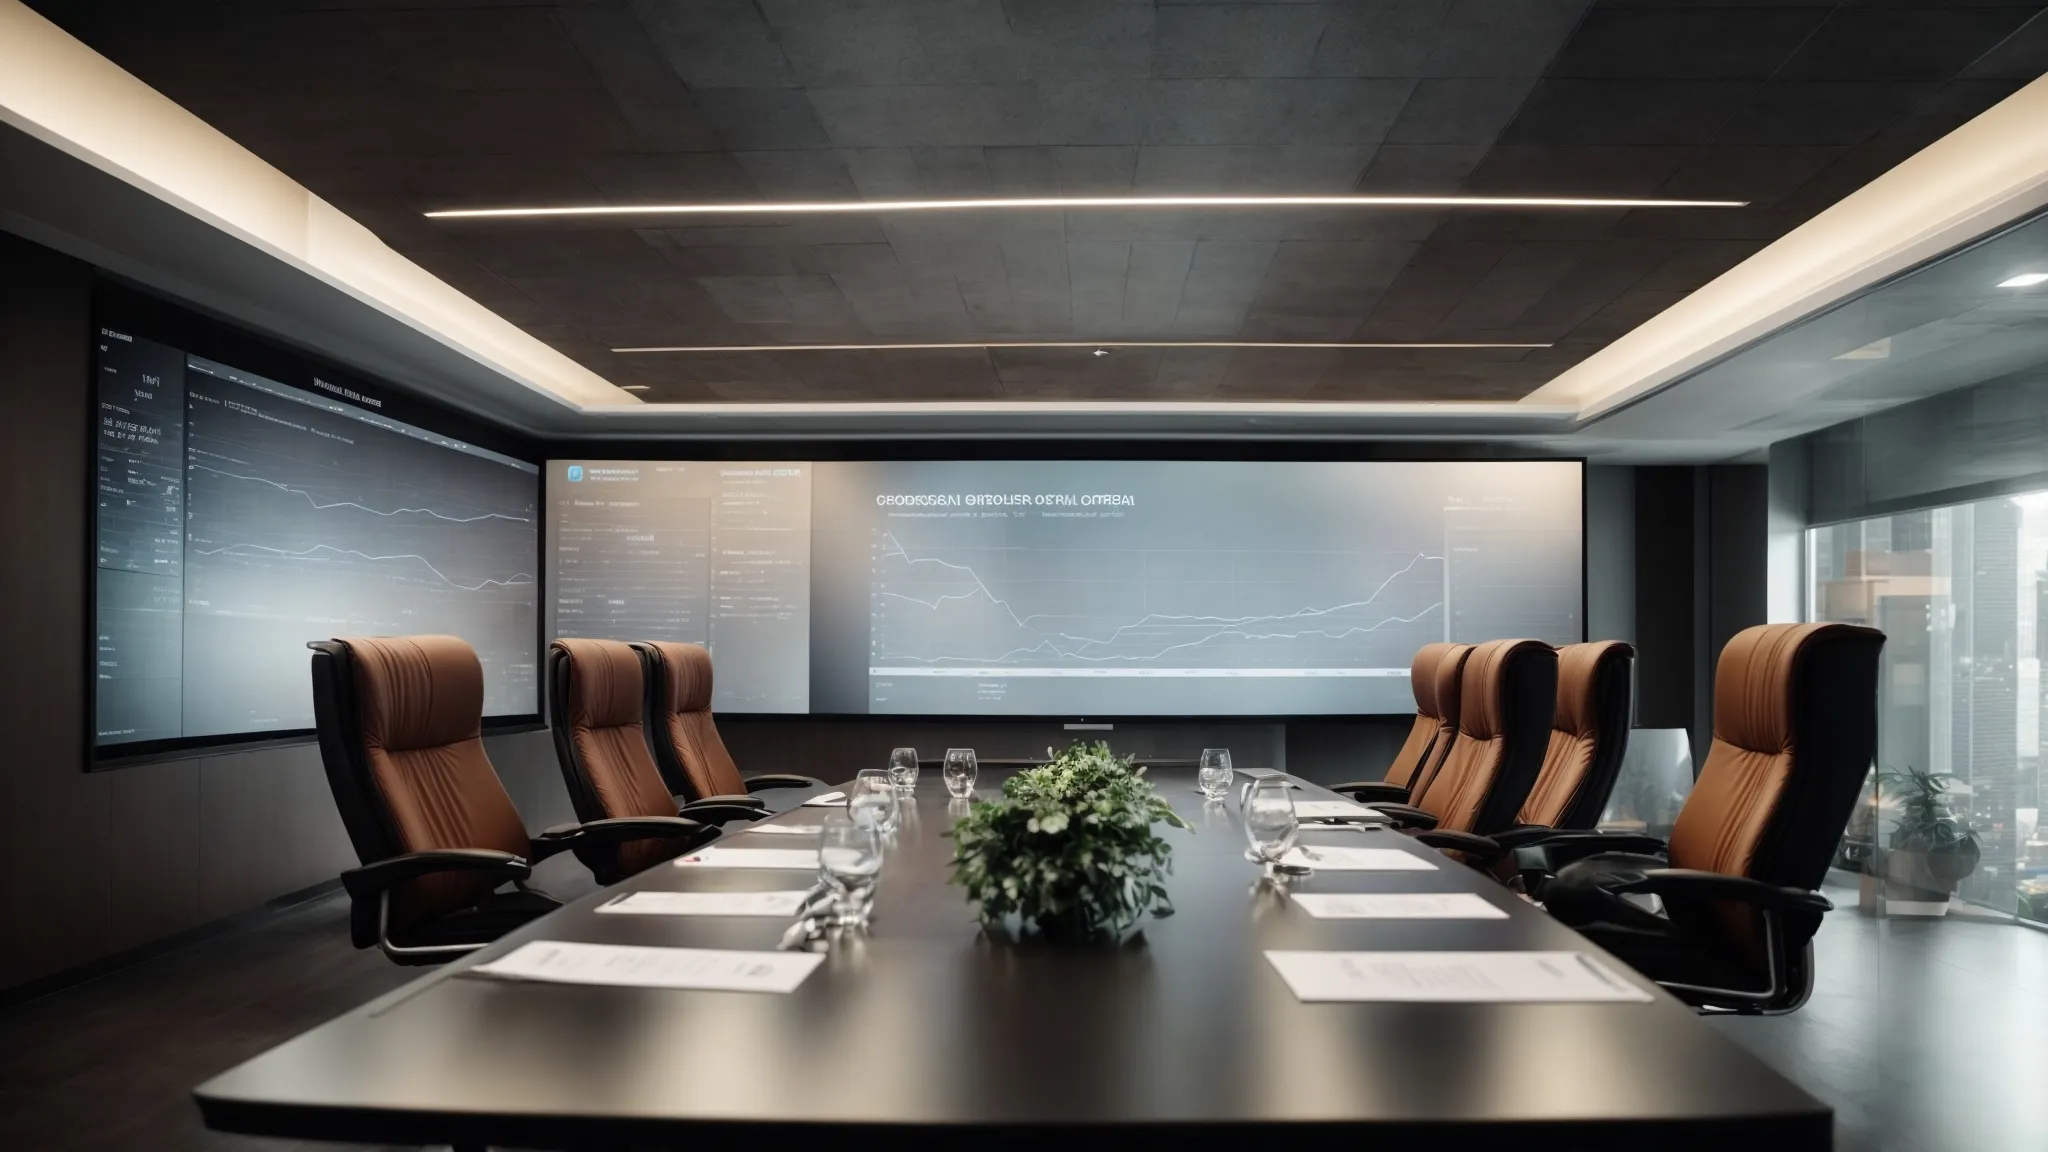 a meeting room with a large monitor displaying graphs and website traffic data, where marketing professionals are discussing strategies.